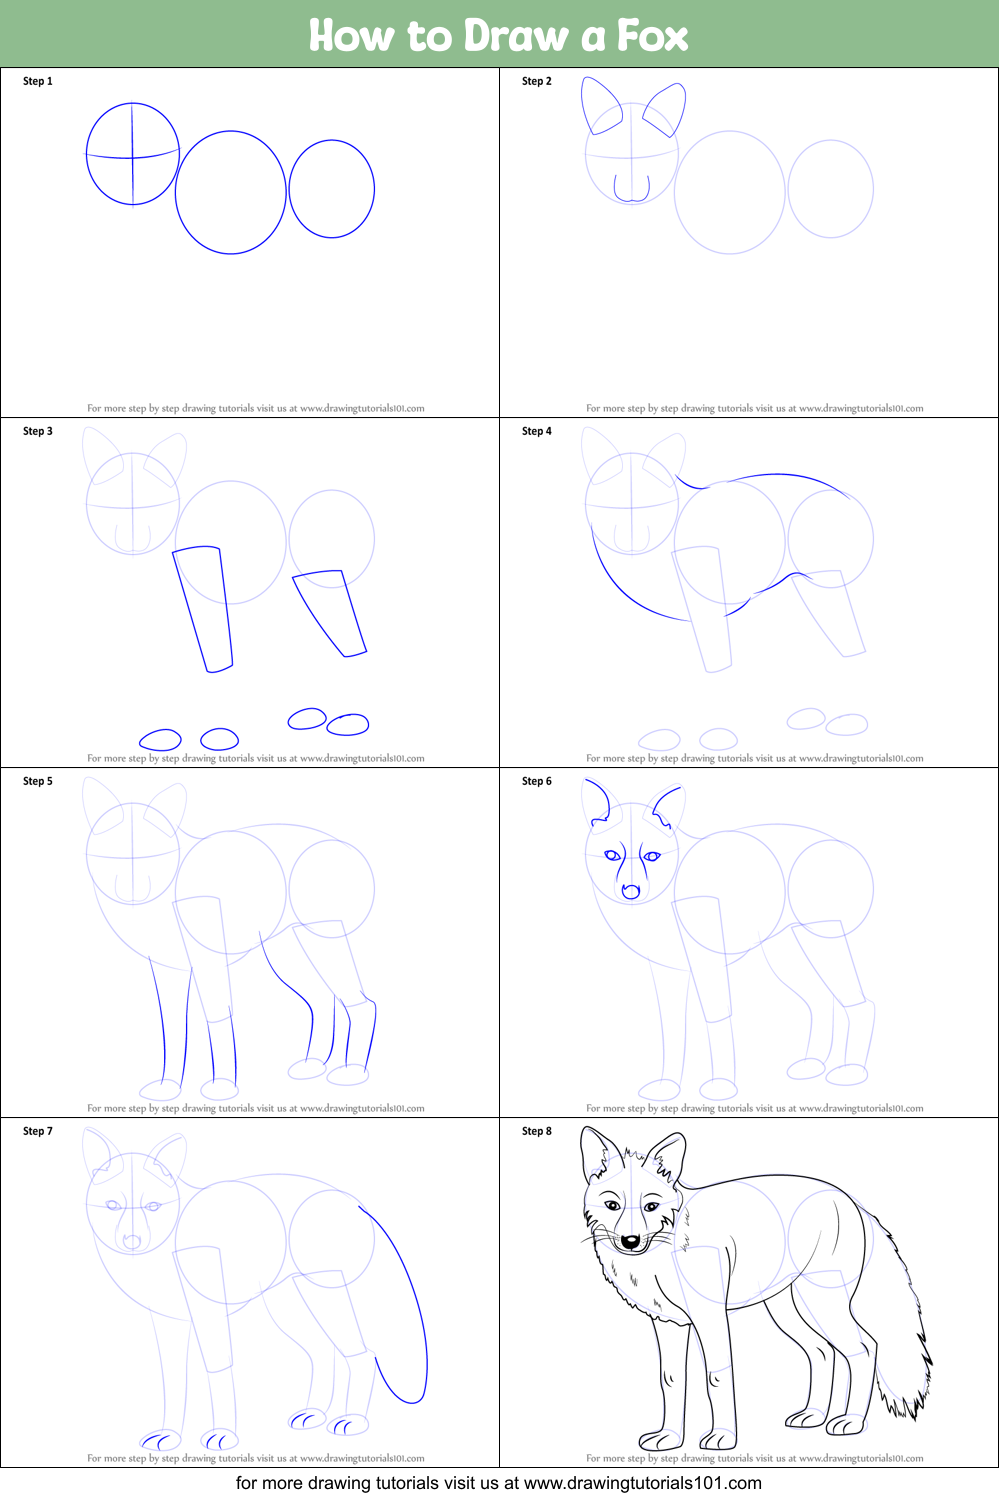 How to Draw a Fox (Zoo Animals) Step by Step | DrawingTutorials101.com